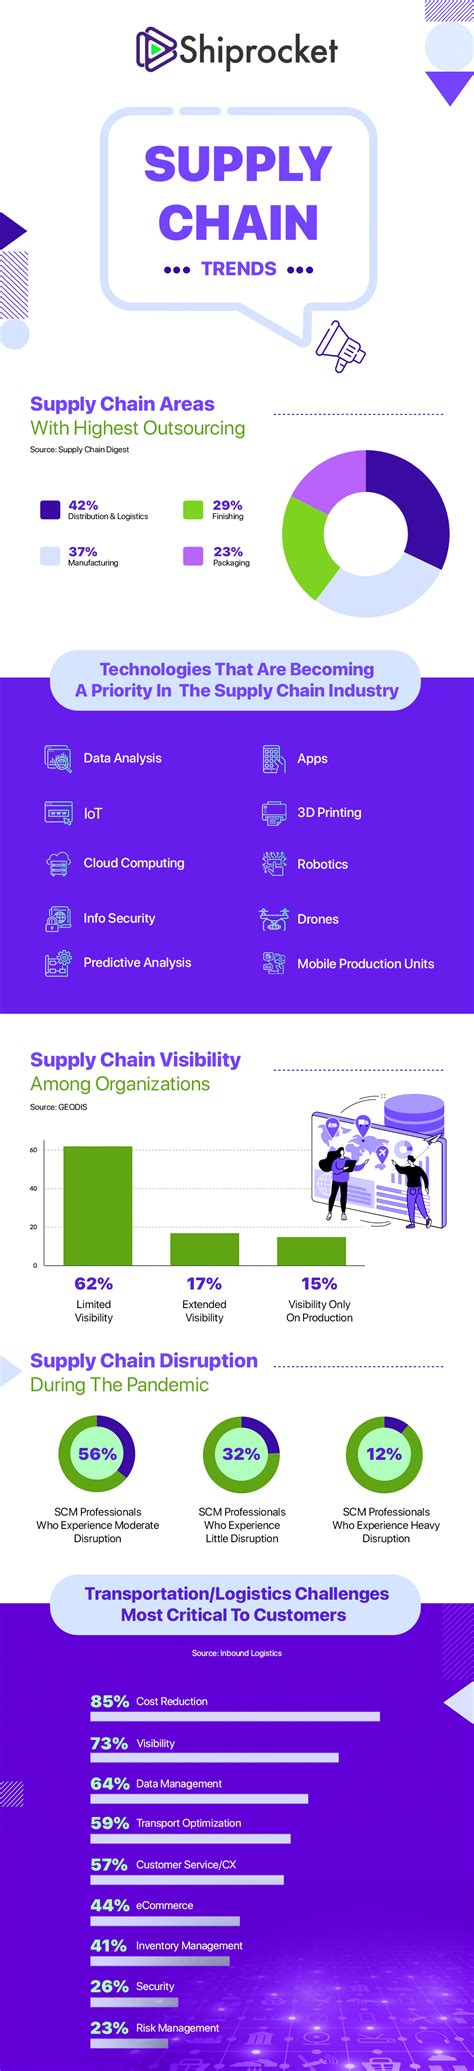 Supply Chain Trends For 2022 And 2023 Infographic Shiprocket